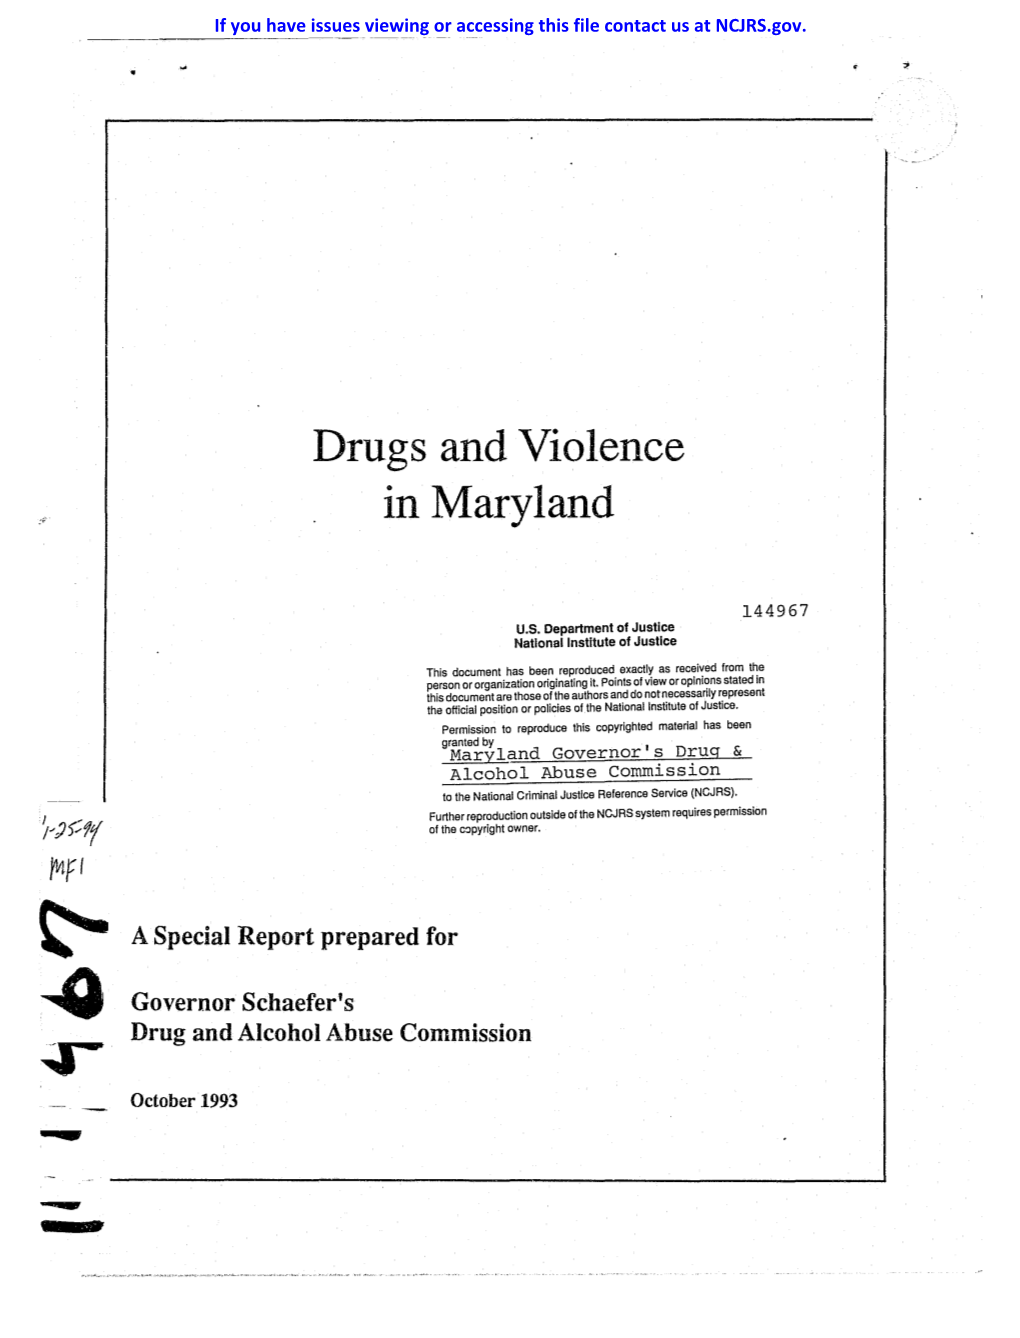 Drugs and Violence in Maryland